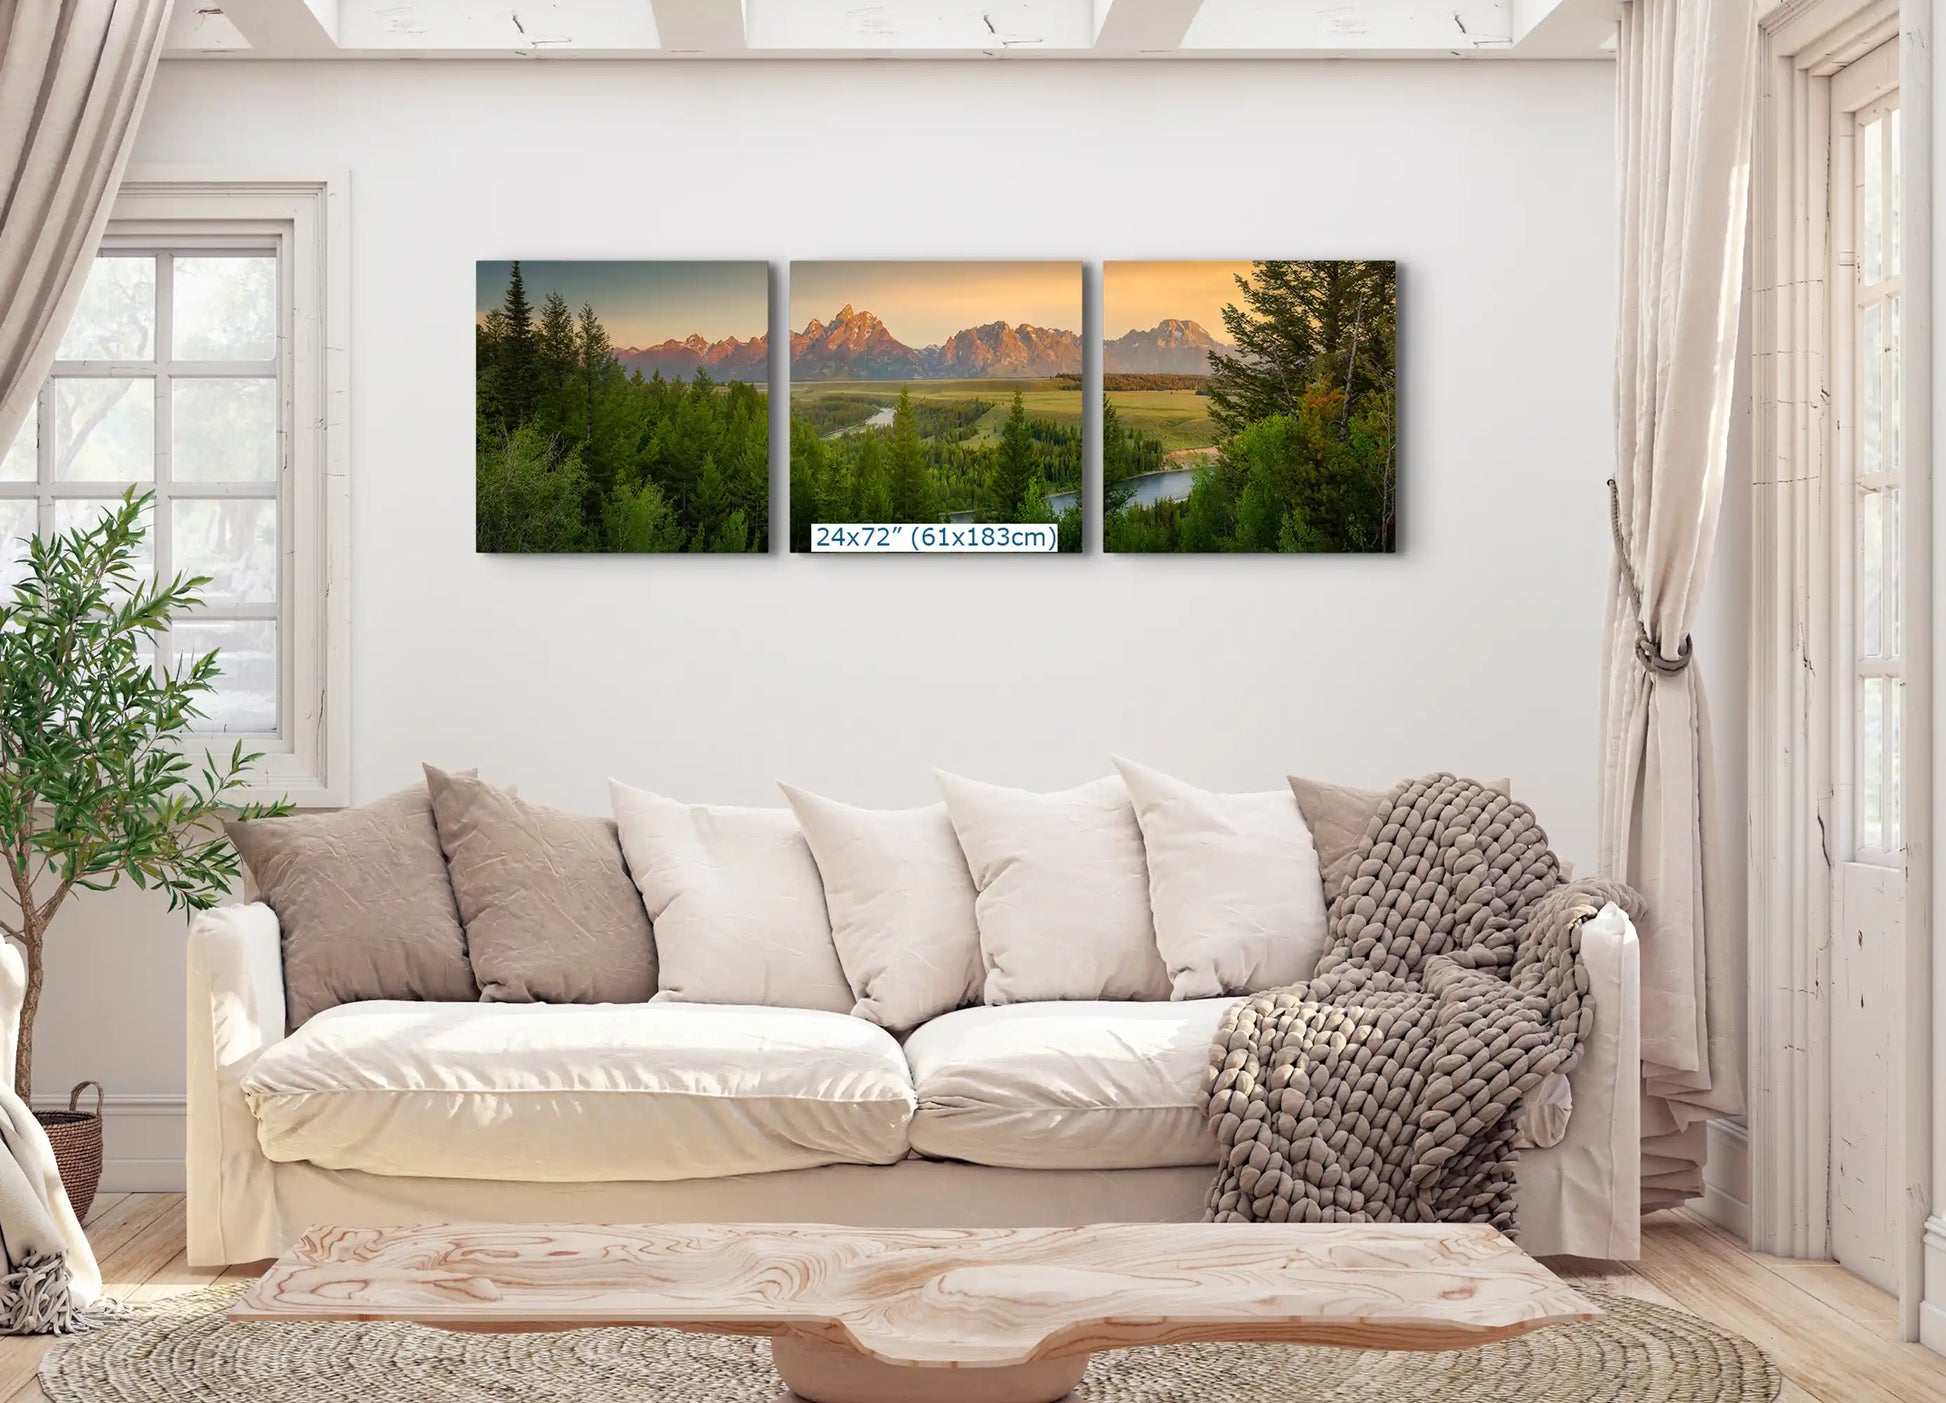 Three-piece 24x72 set of the Teton Mountains and Snake River, creating a continuous panoramic view in a cozy living room.